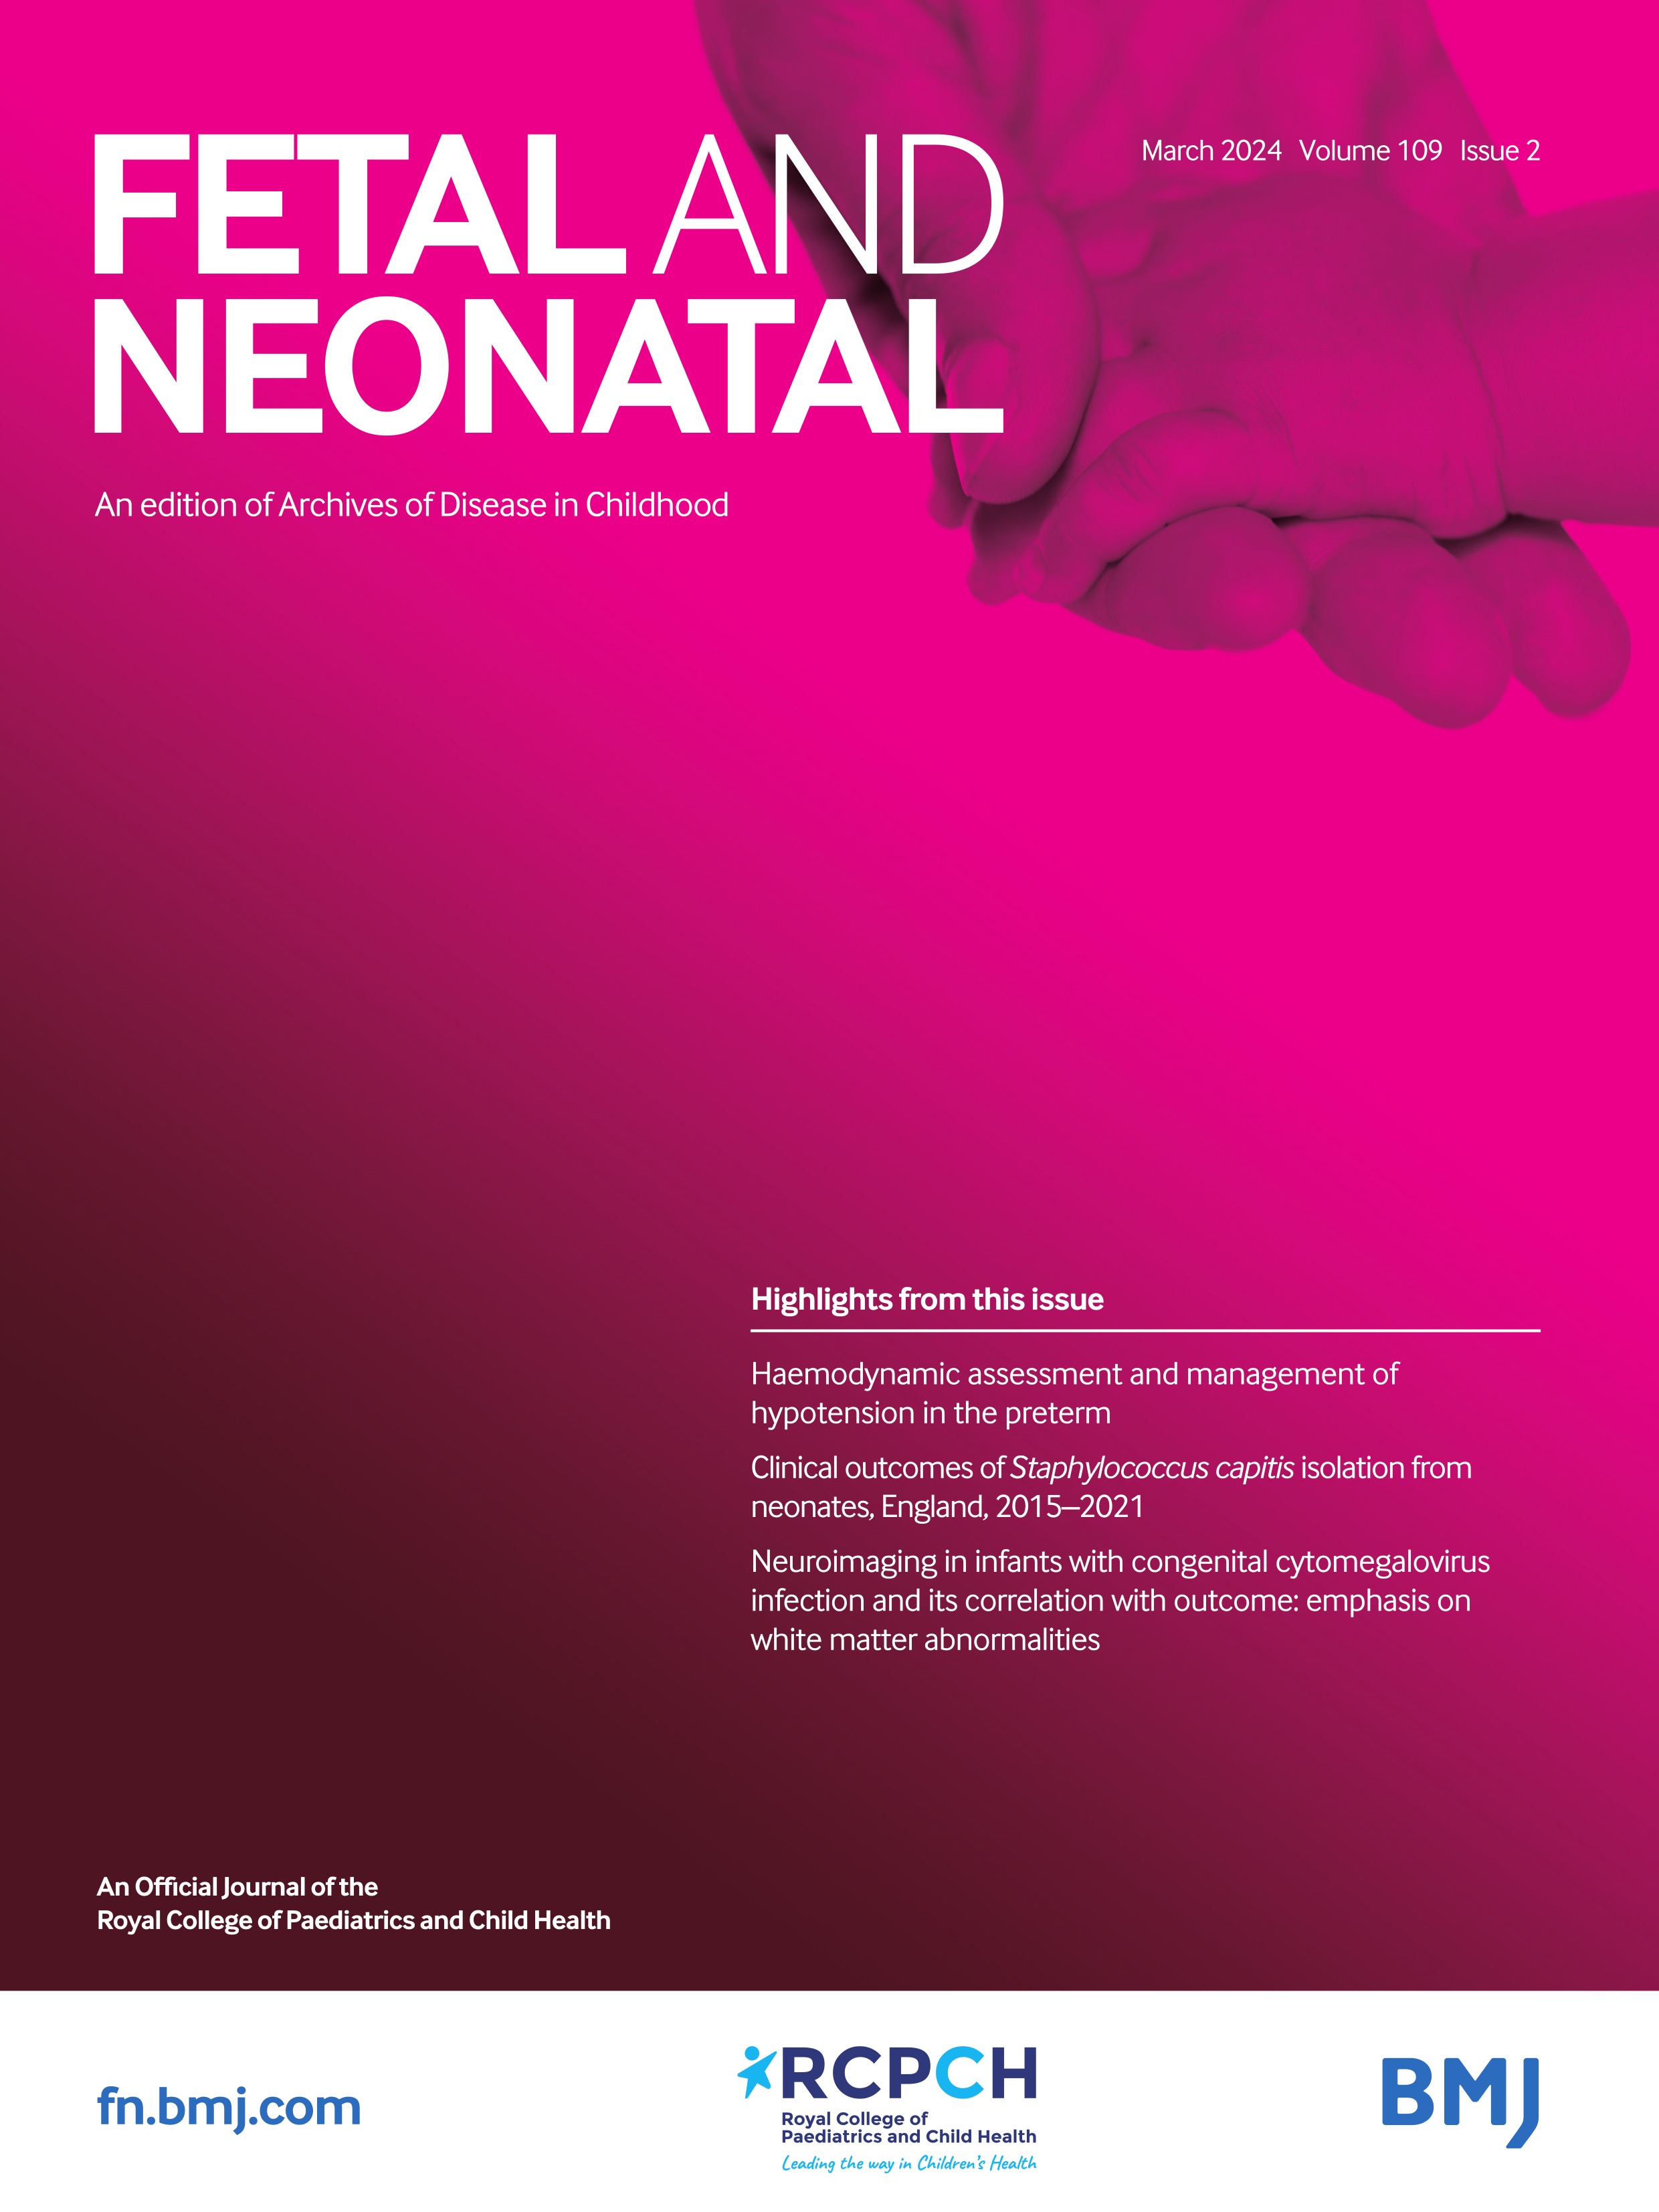 Neuroimaging in infants with congenital cytomegalovirus infection and its correlation with outcome: emphasis on white matter abnormalities